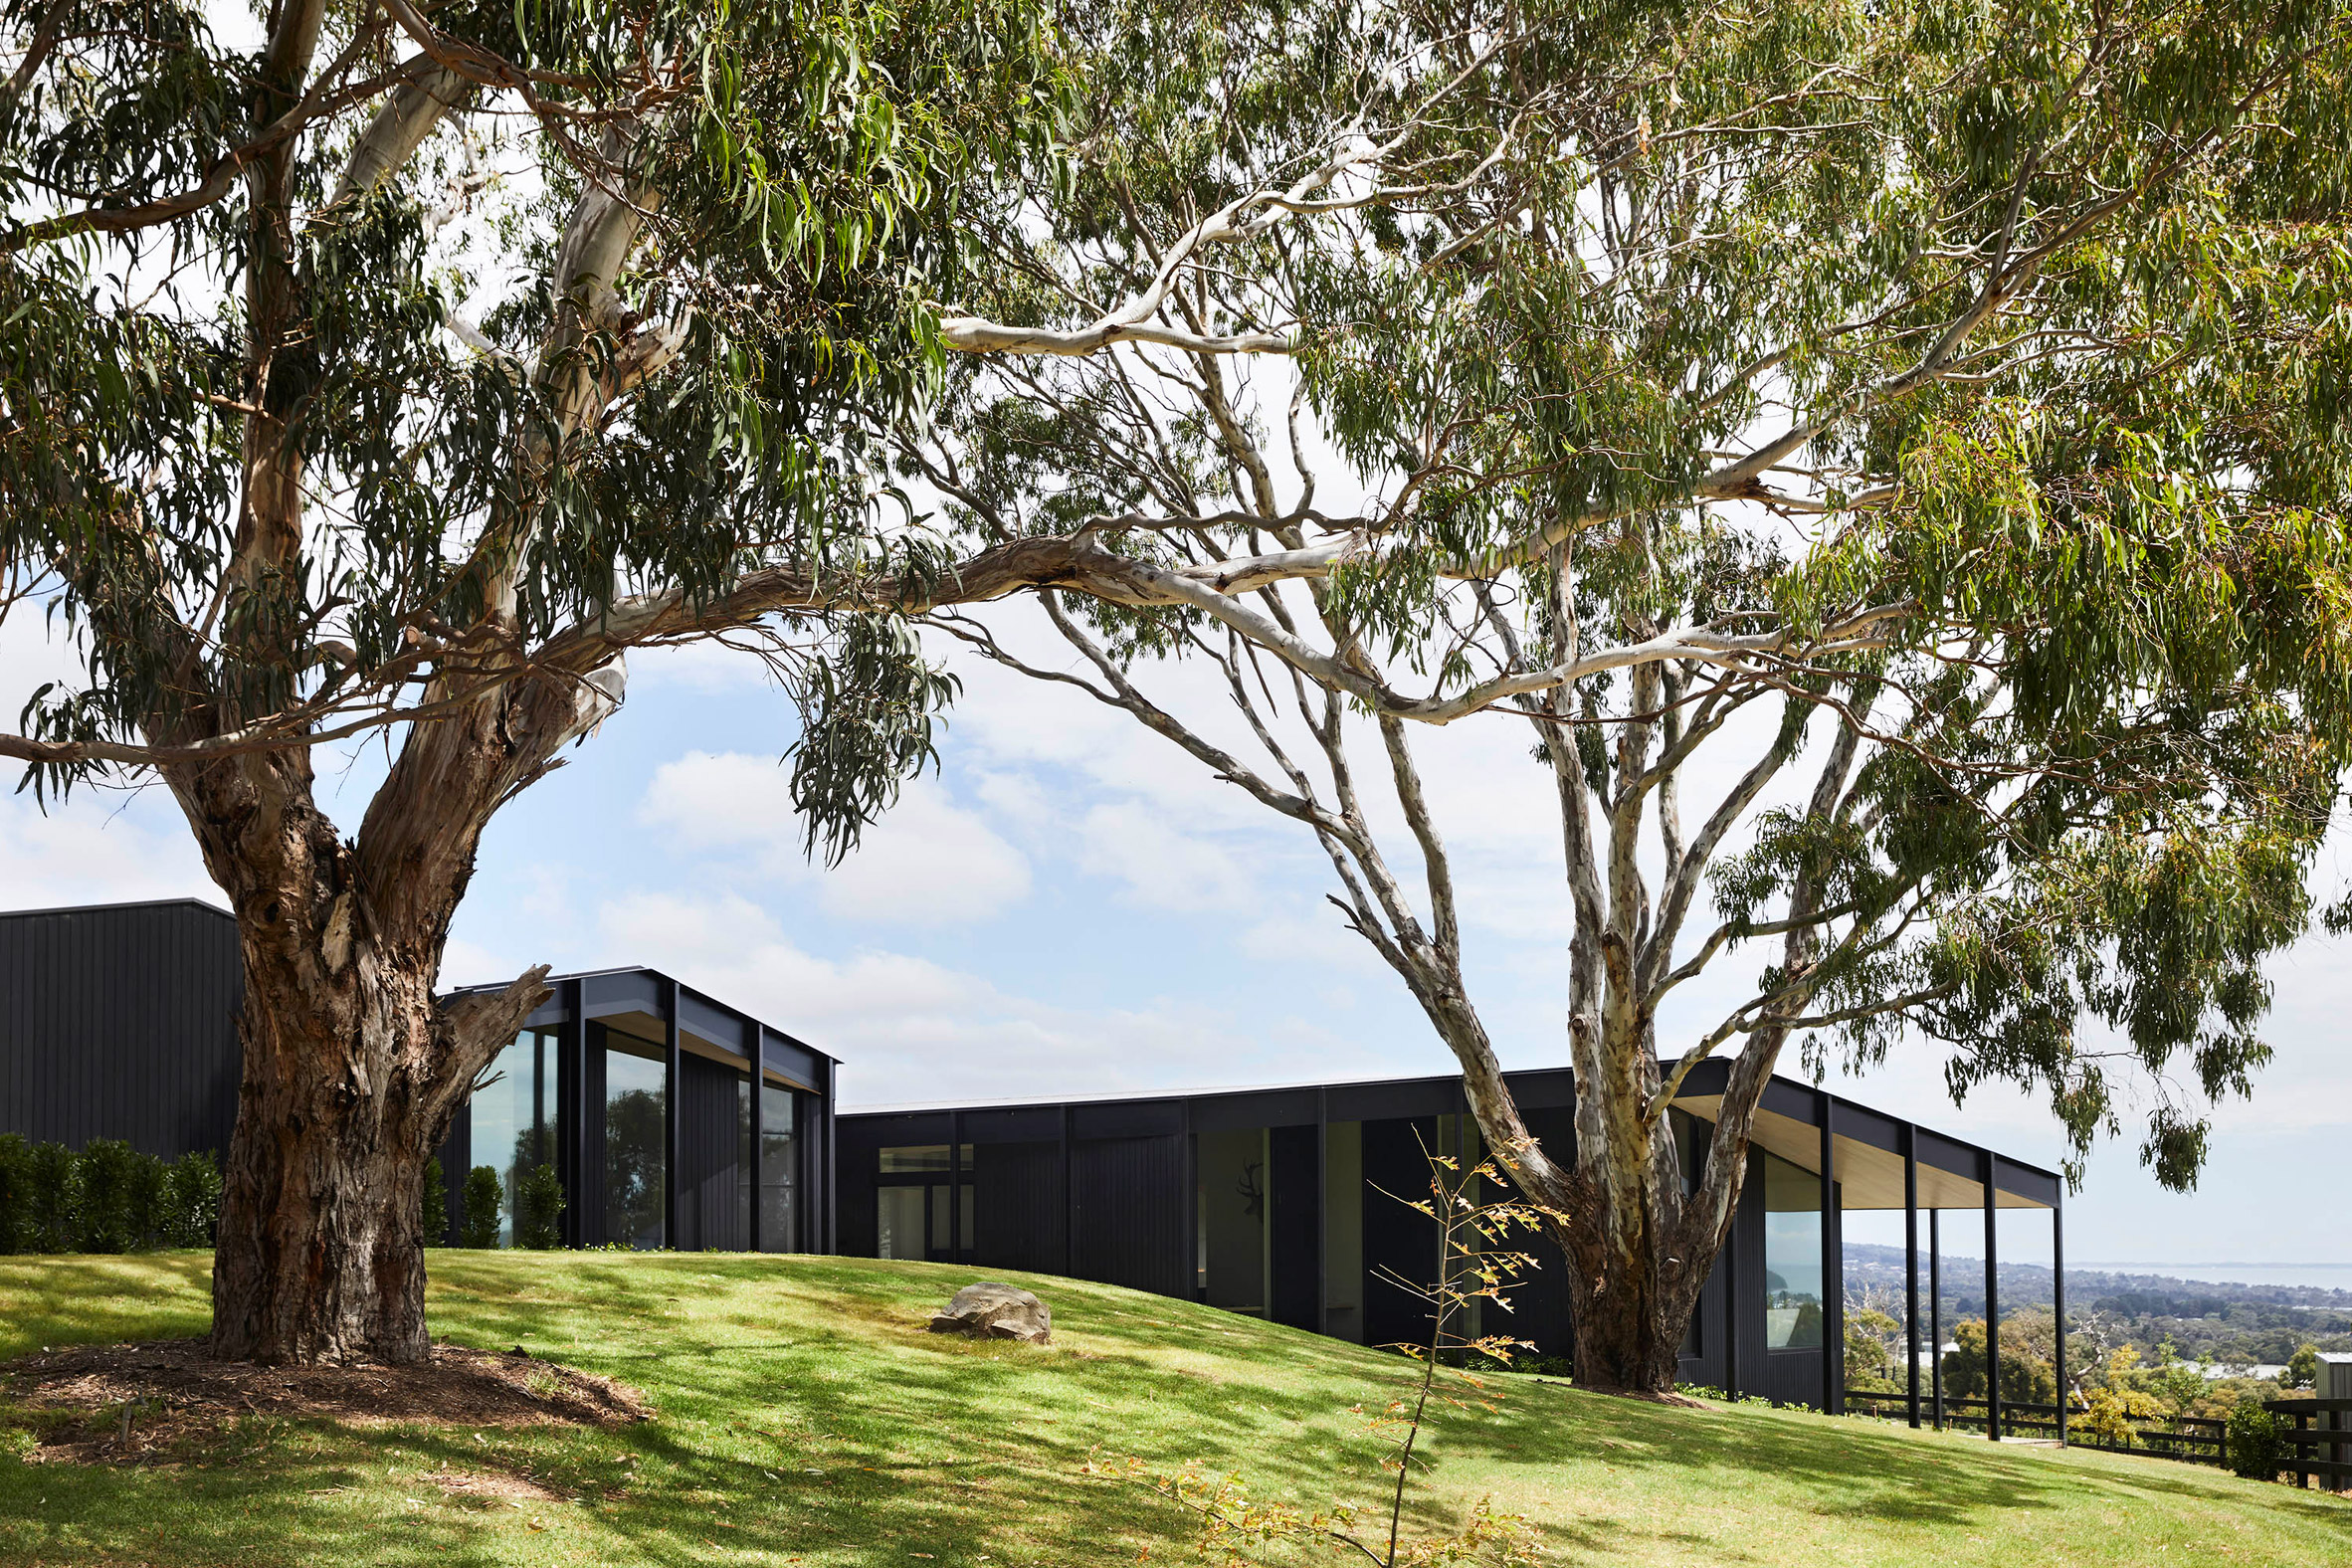 Carr's Red Hill Farm House is inspired by modernism and agricultural architecture